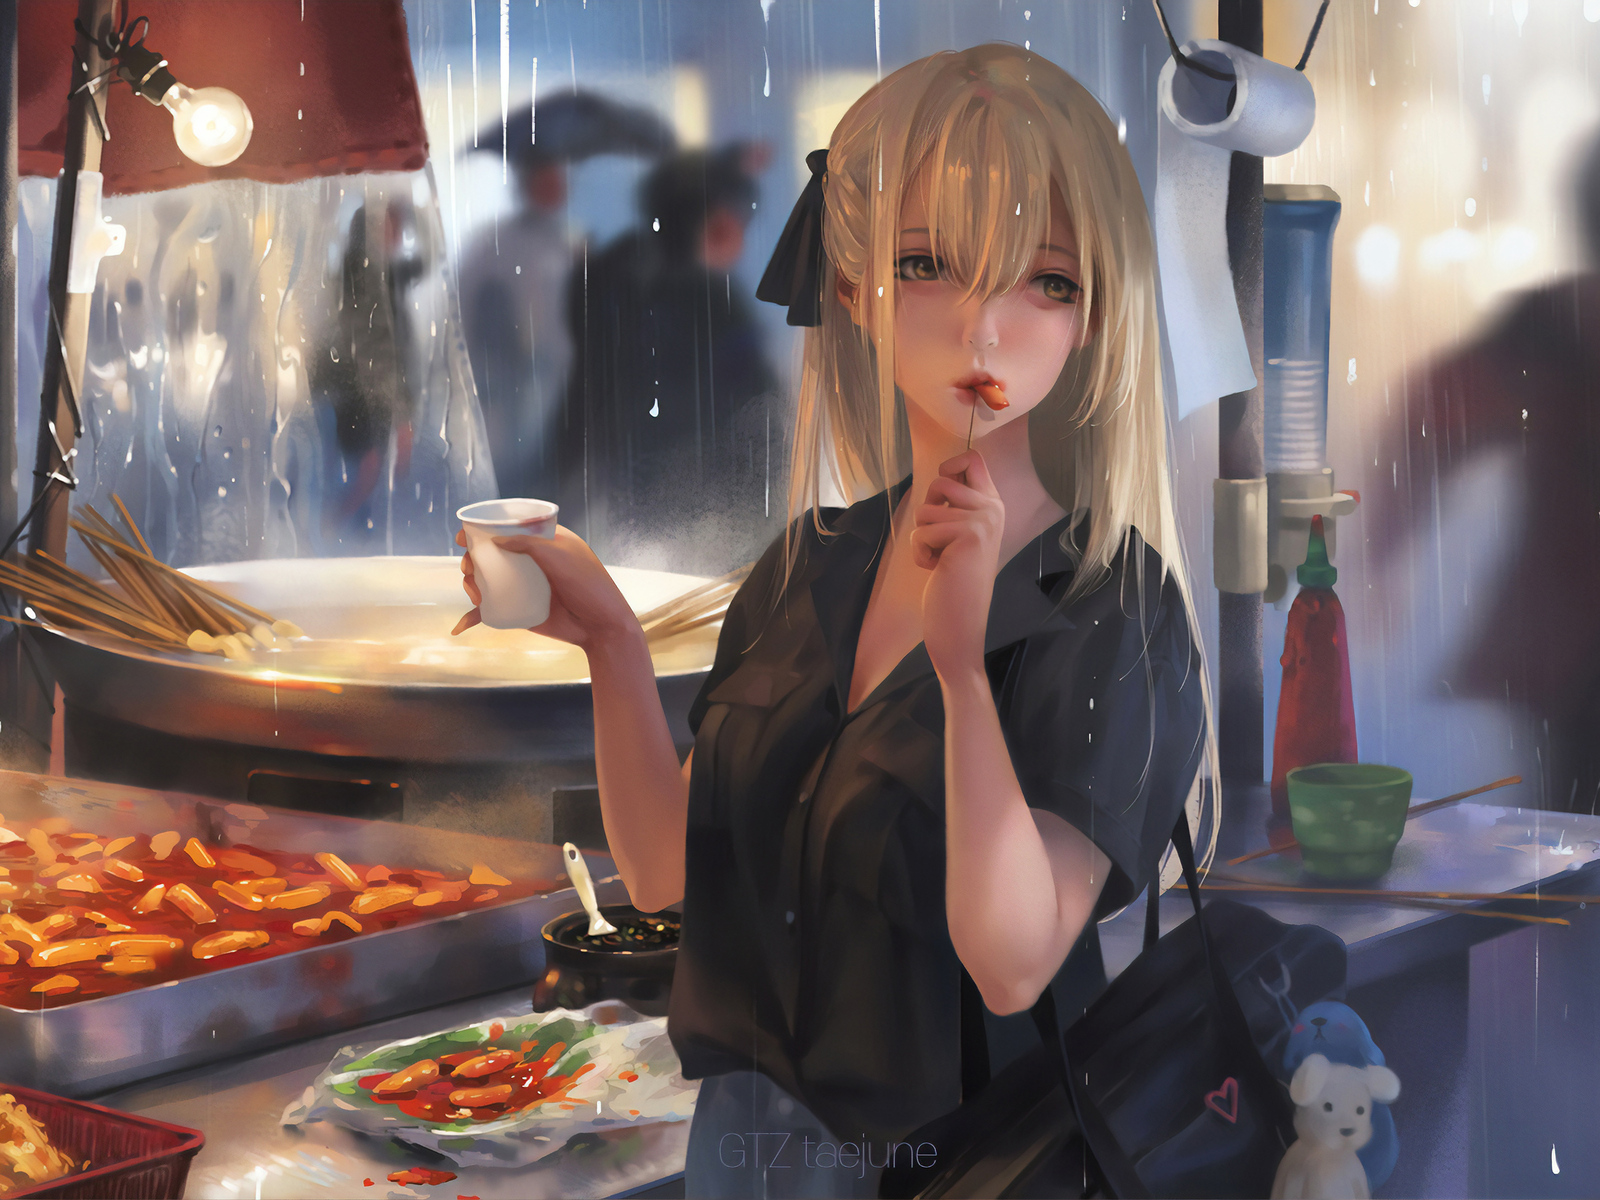 A blonde anime girl eats noodles in the rain - Food